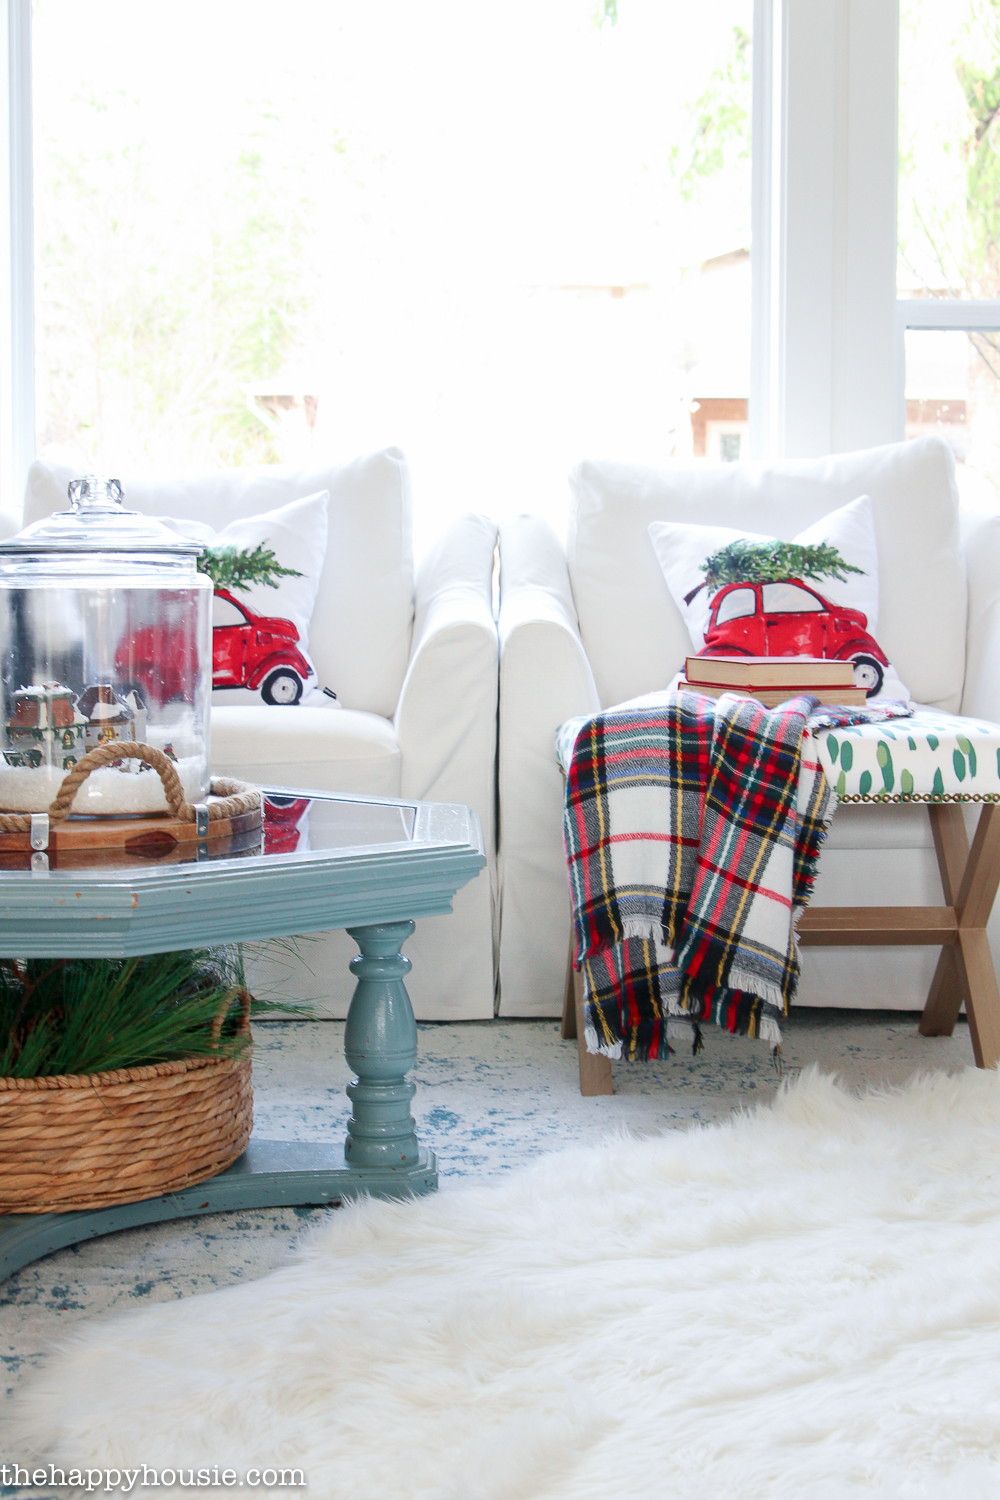 Christmas throw pillows are on the white armchairs.